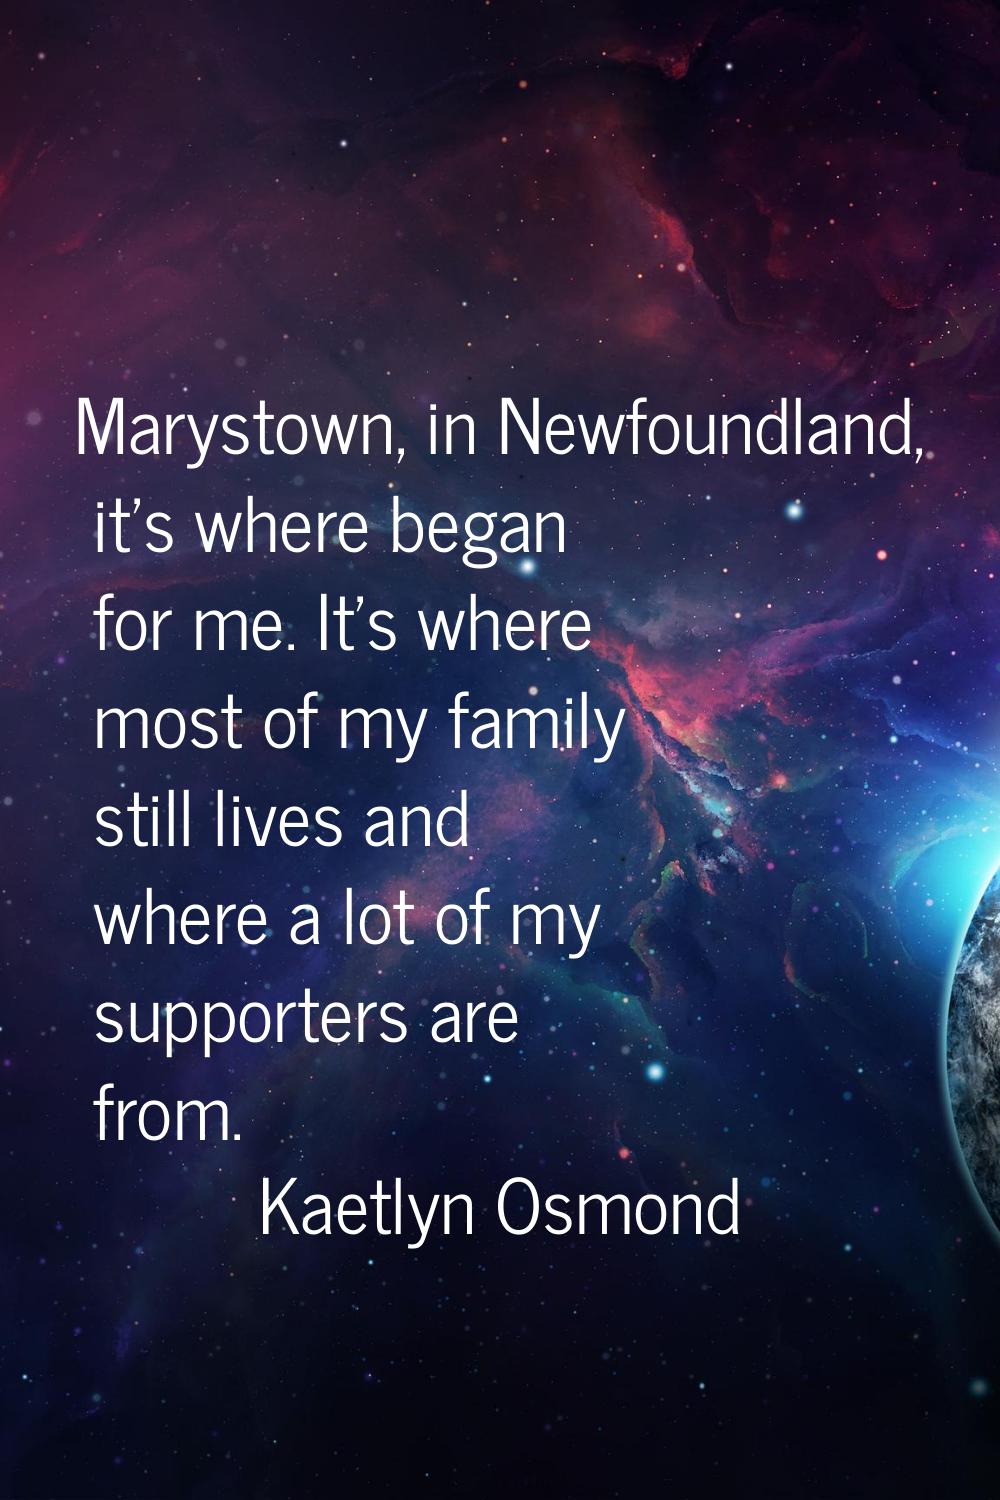 Marystown, in Newfoundland, it's where began for me. It's where most of my family still lives and w